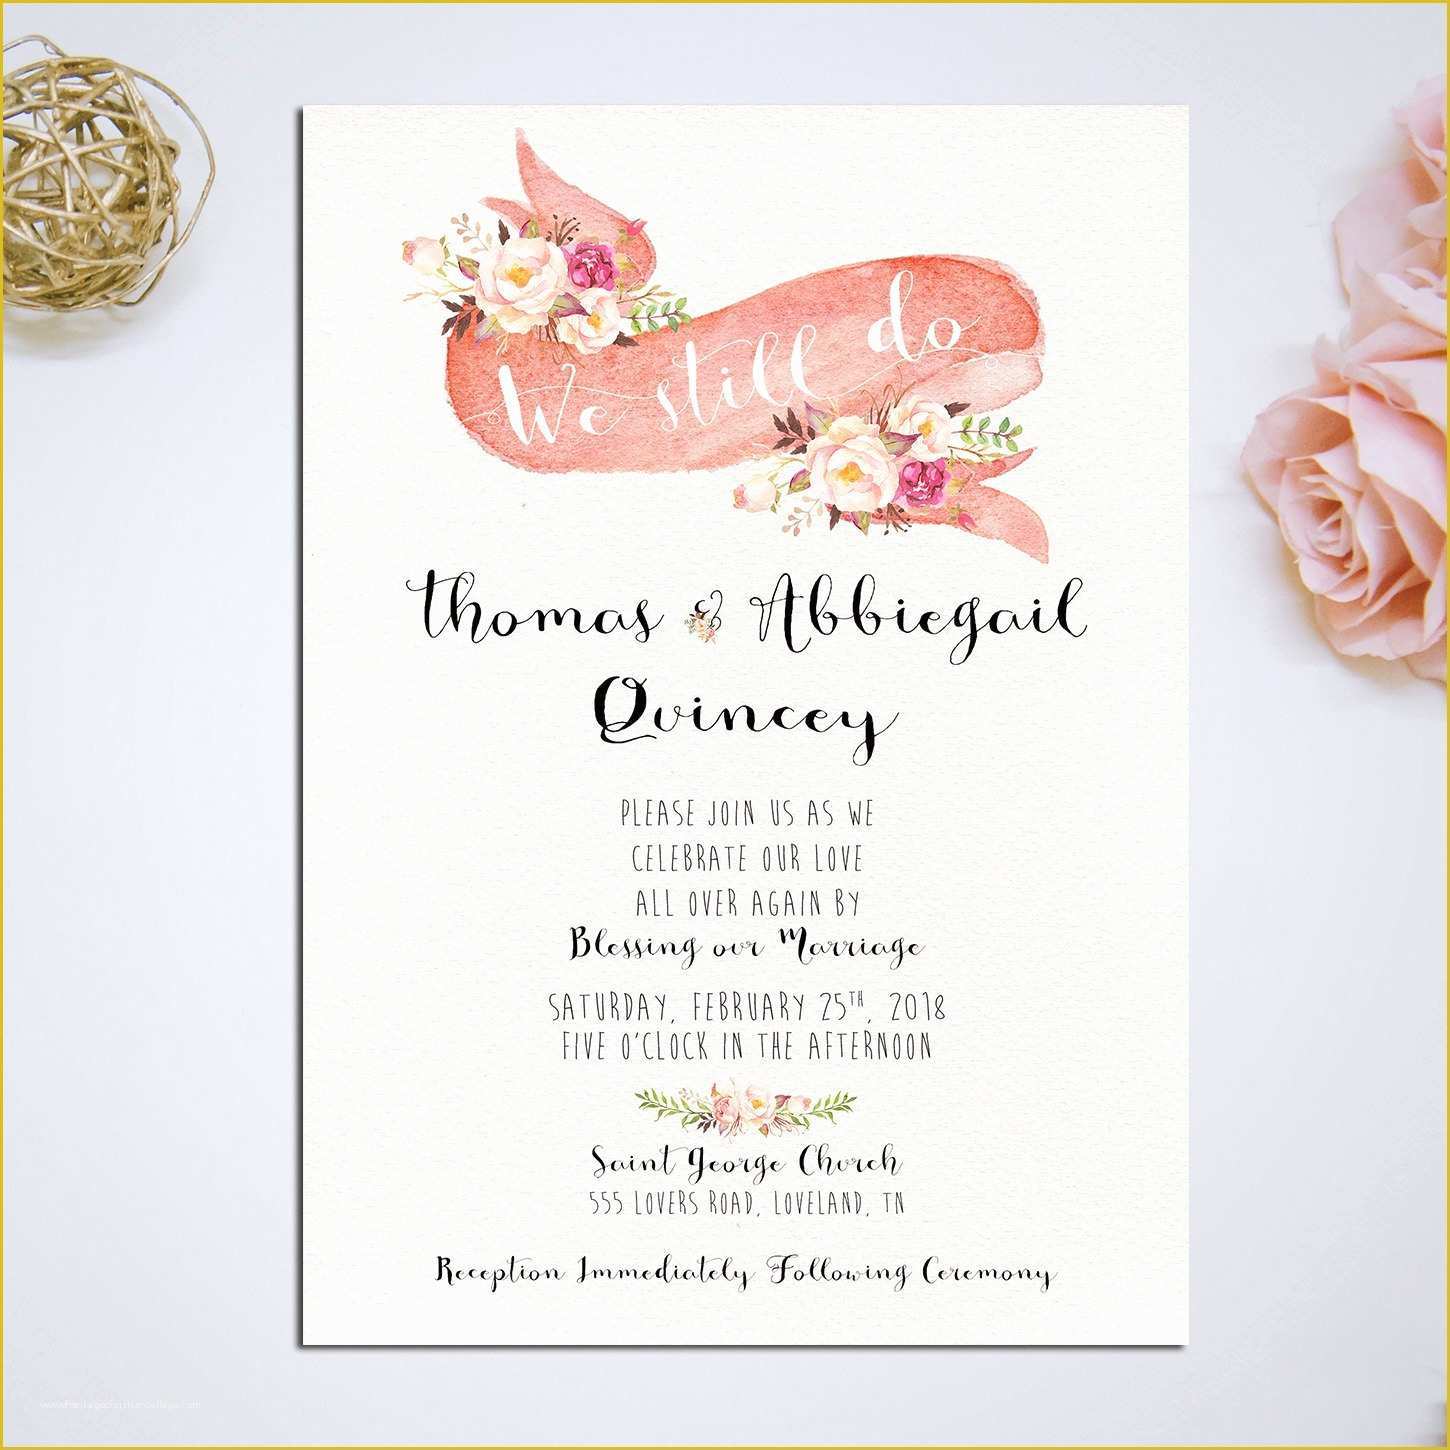 Vow Renewal Invitation Templates Free Of Vow Renewal Invitation We Still Do Romantic Pink